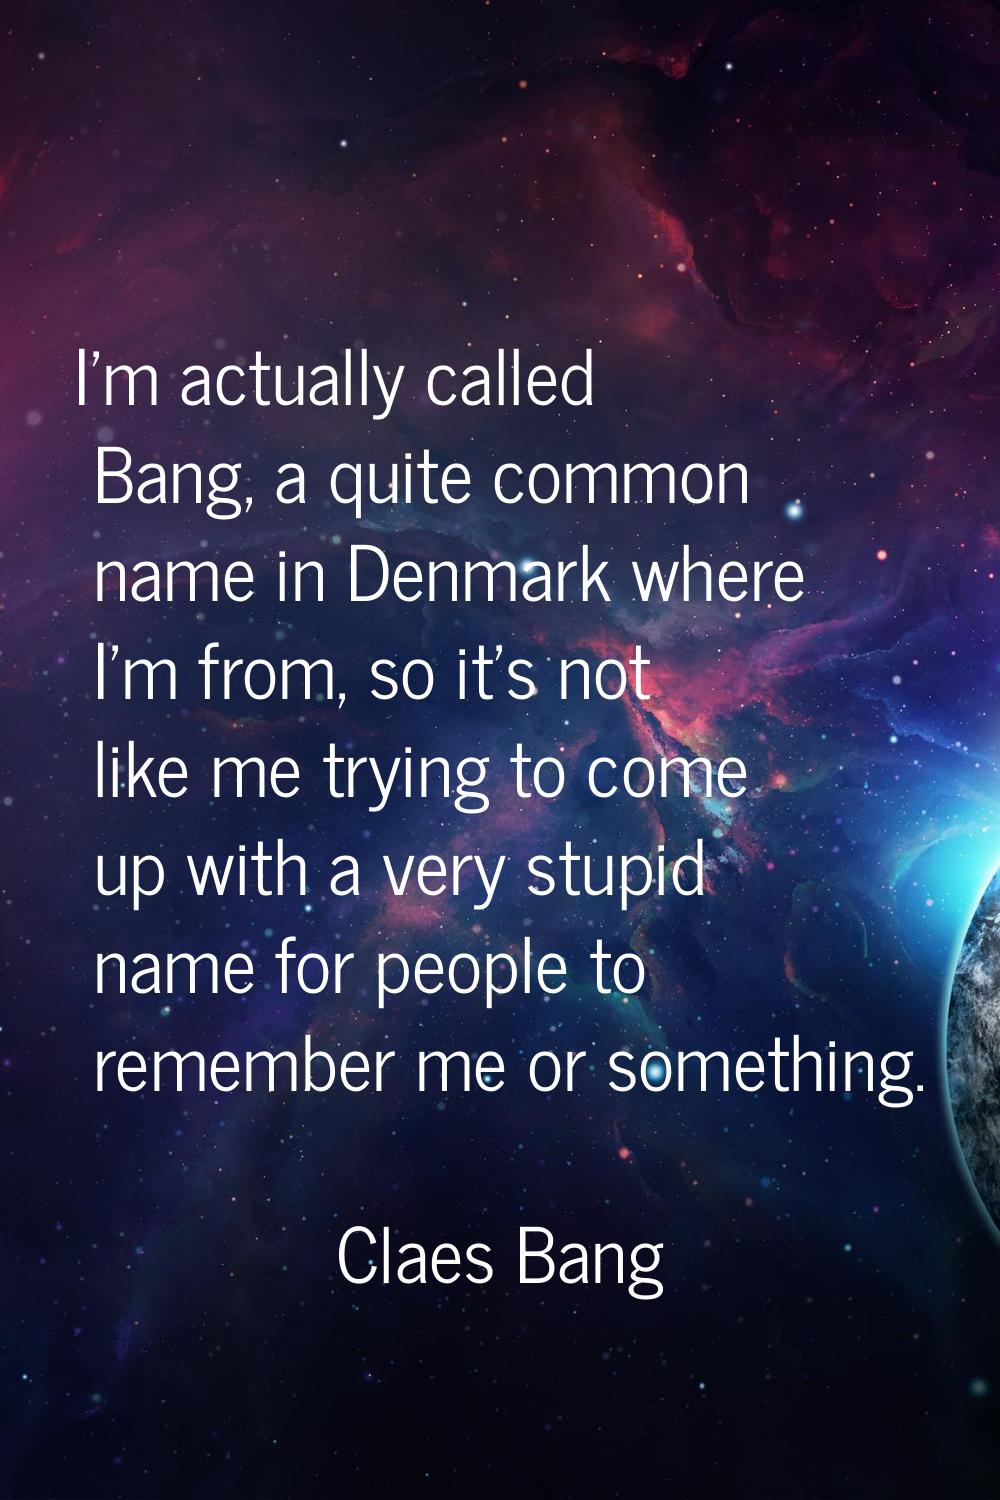 I'm actually called Bang, a quite common name in Denmark where I'm from, so it's not like me trying